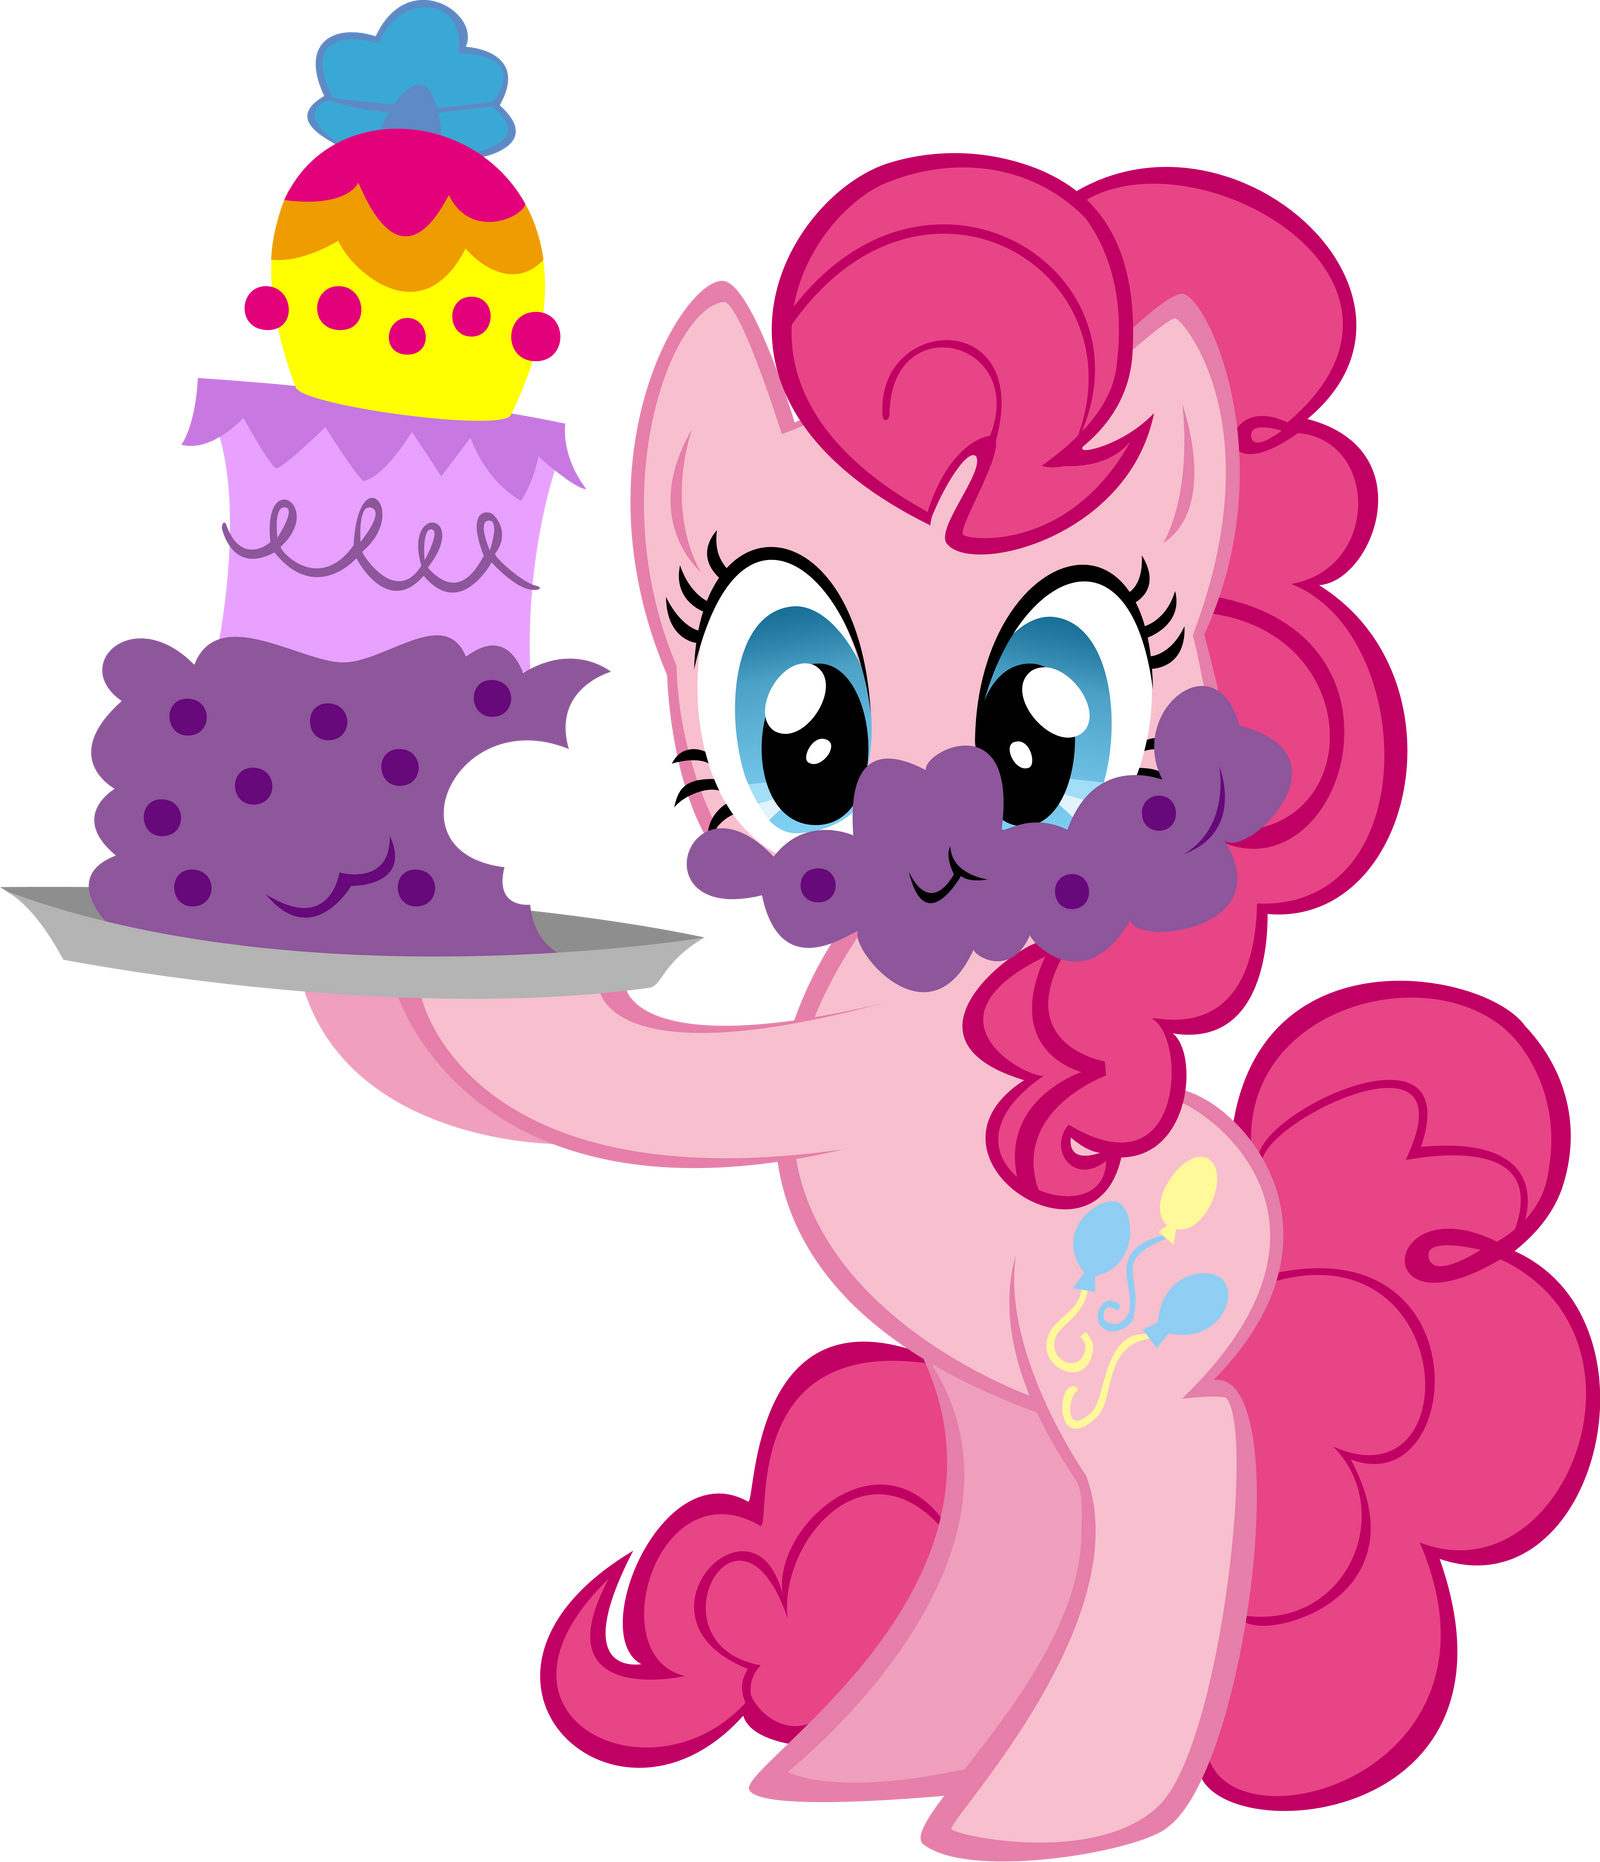 pinkie_pie_with_cake_by_ernestboy-d4y5xx1.png